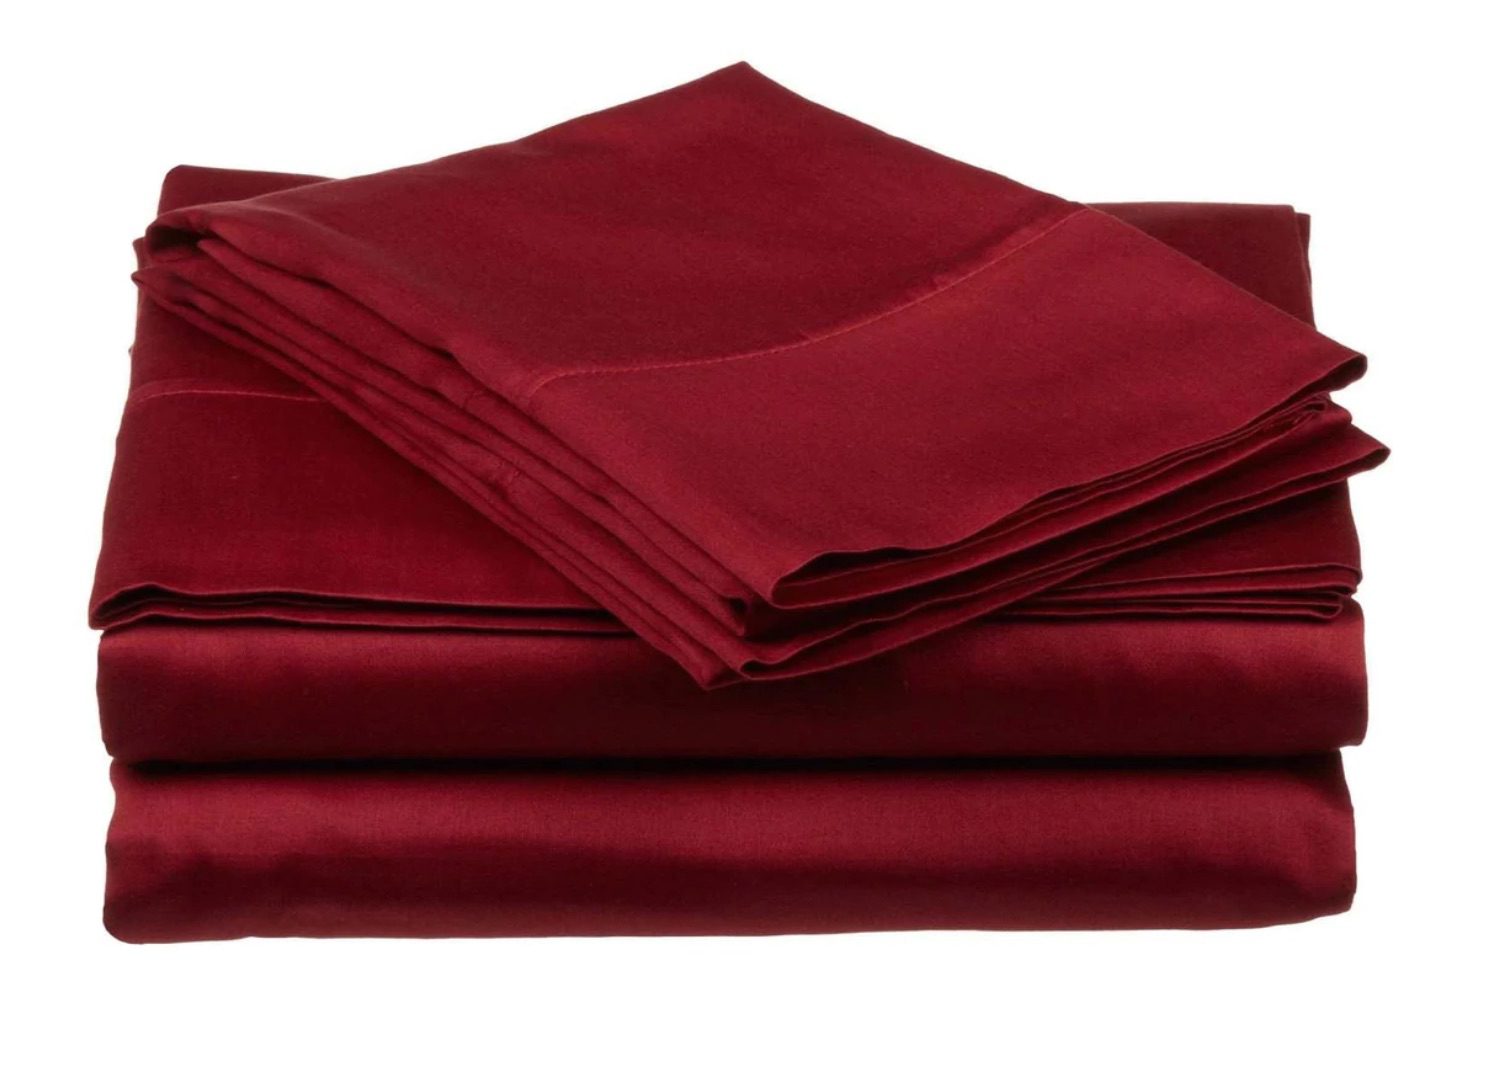 Down Cotton Wrinkle Free Brushed Performance Sheets